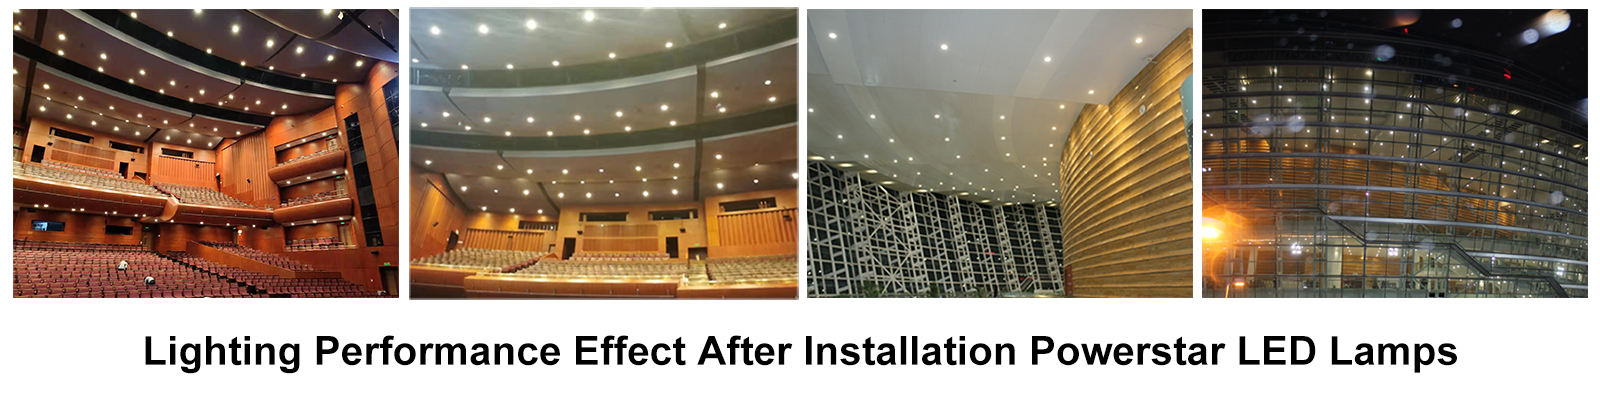 Dongguan Poly Theatre LED Lighting Project